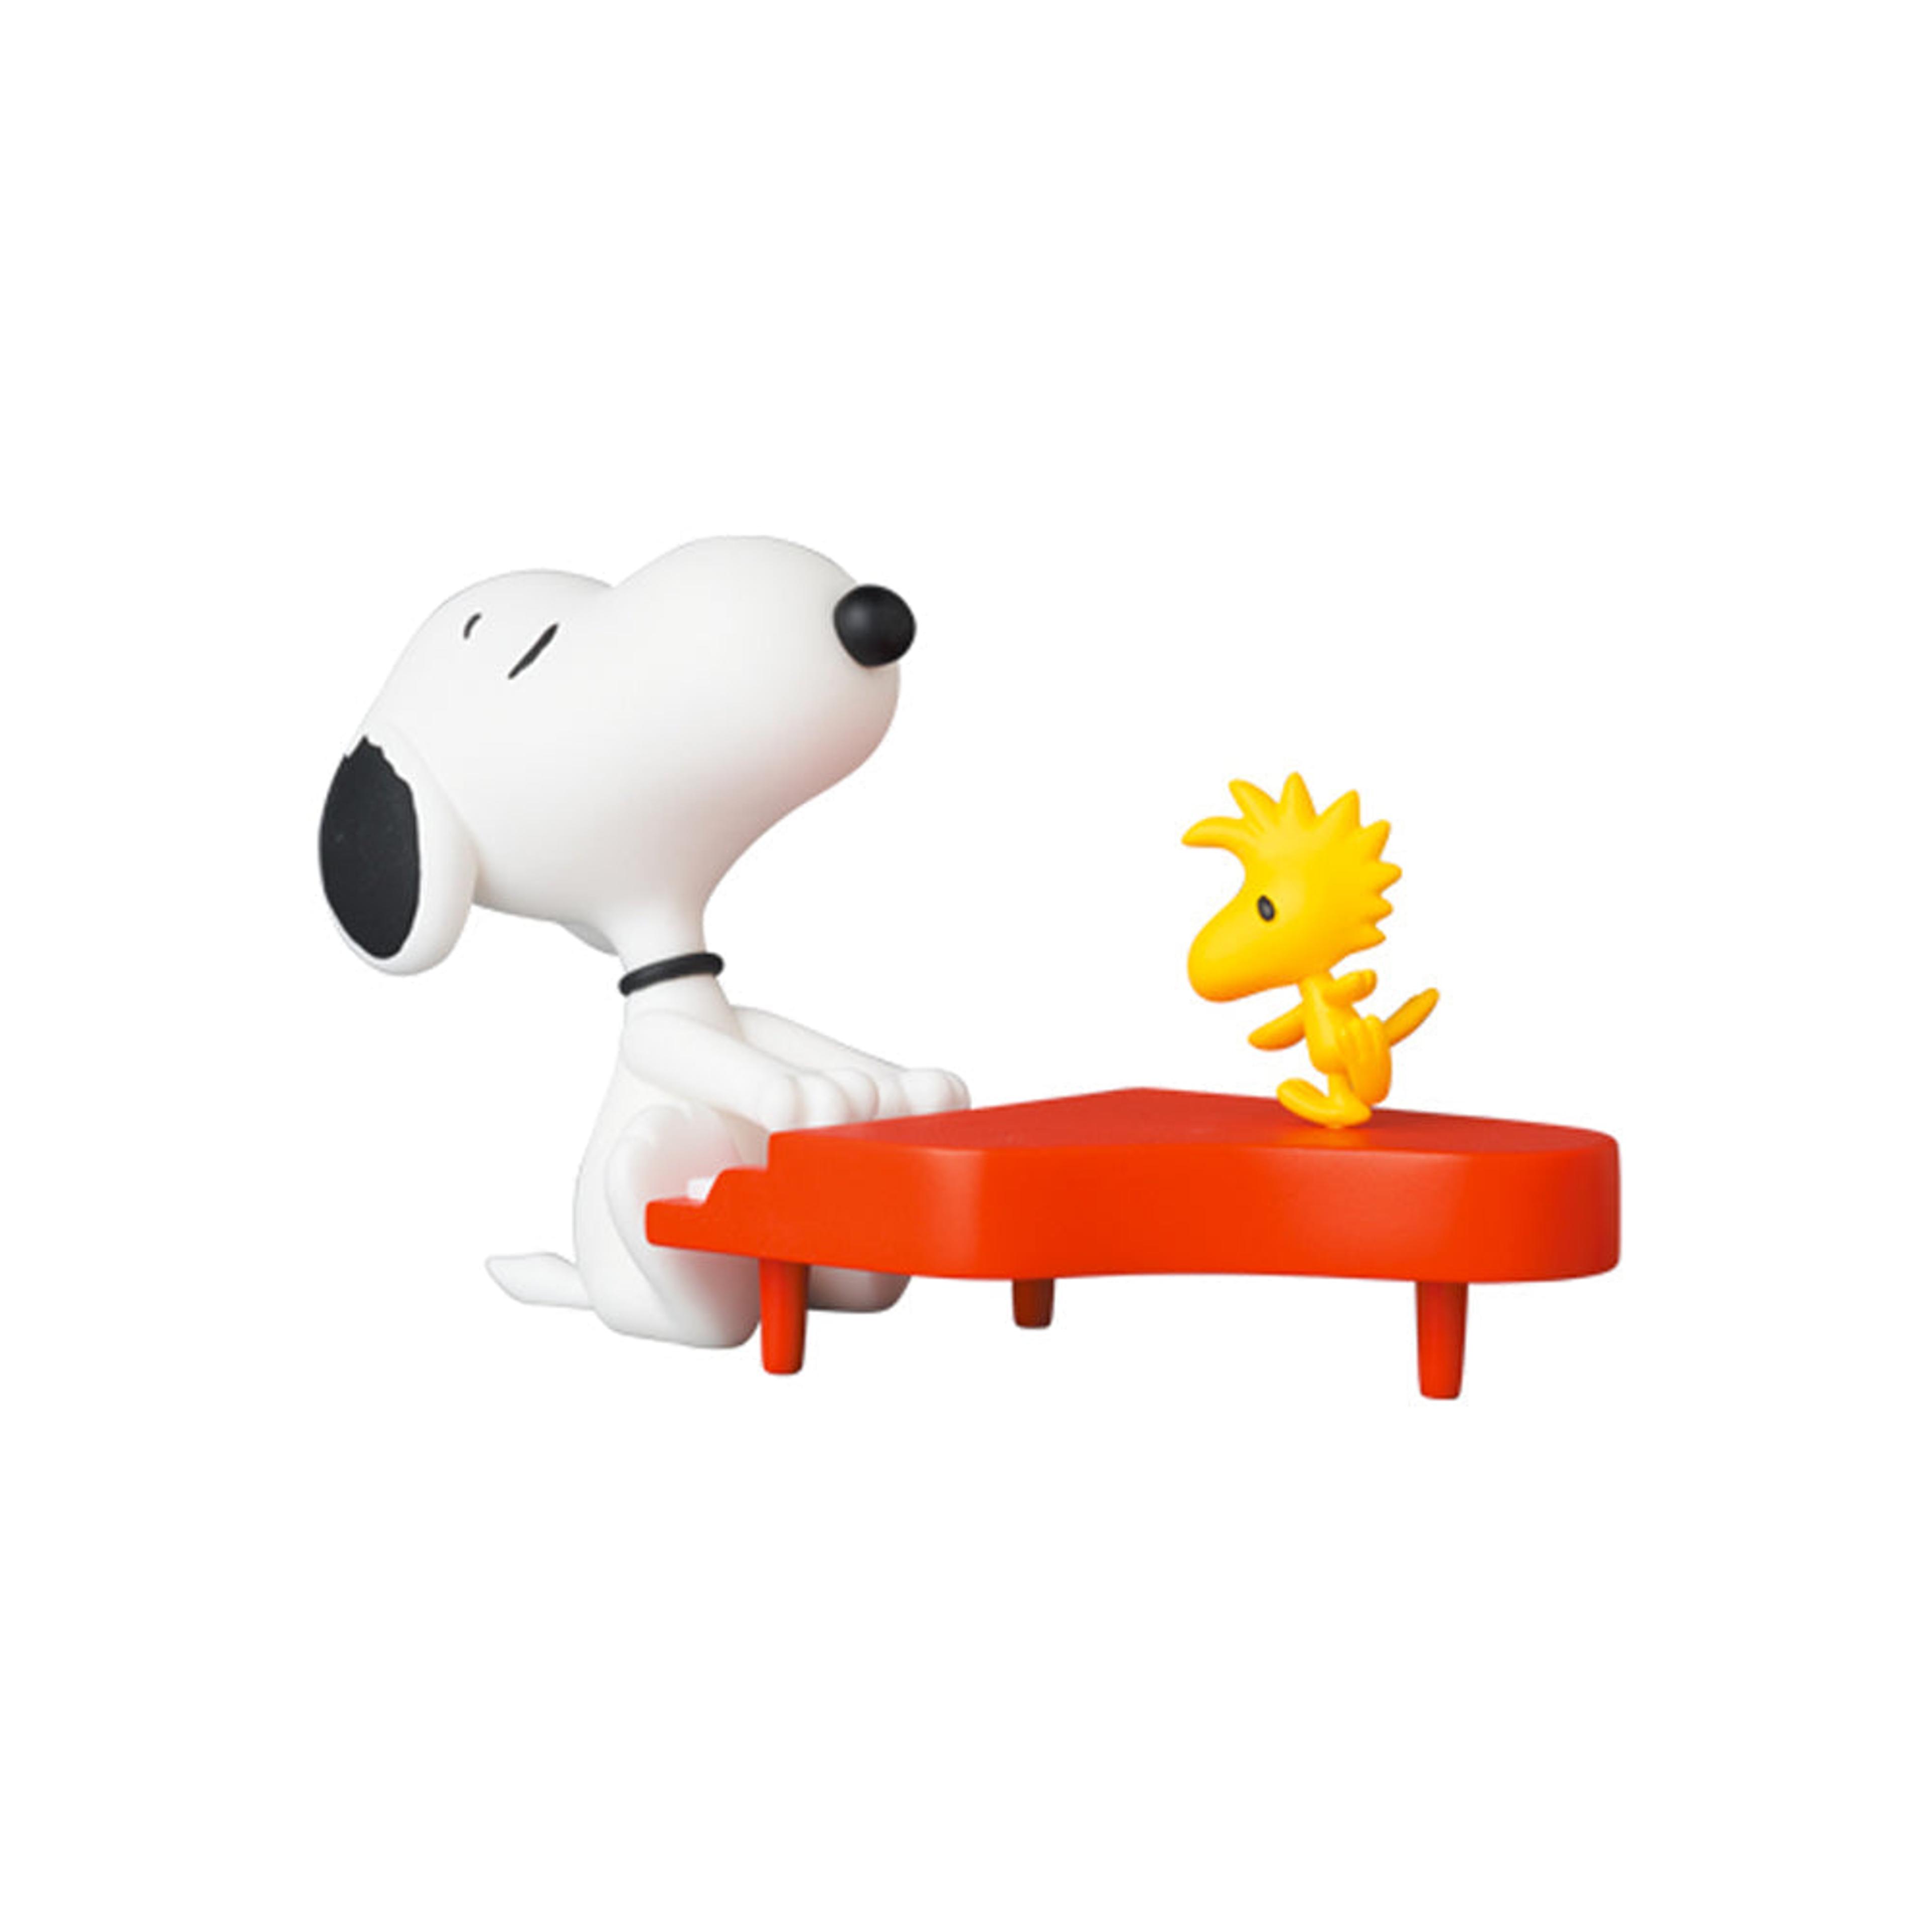 Alternate View 1 of UDF Peanuts Series 13: Pianist Snoopy Ultra Detail Figure by Med